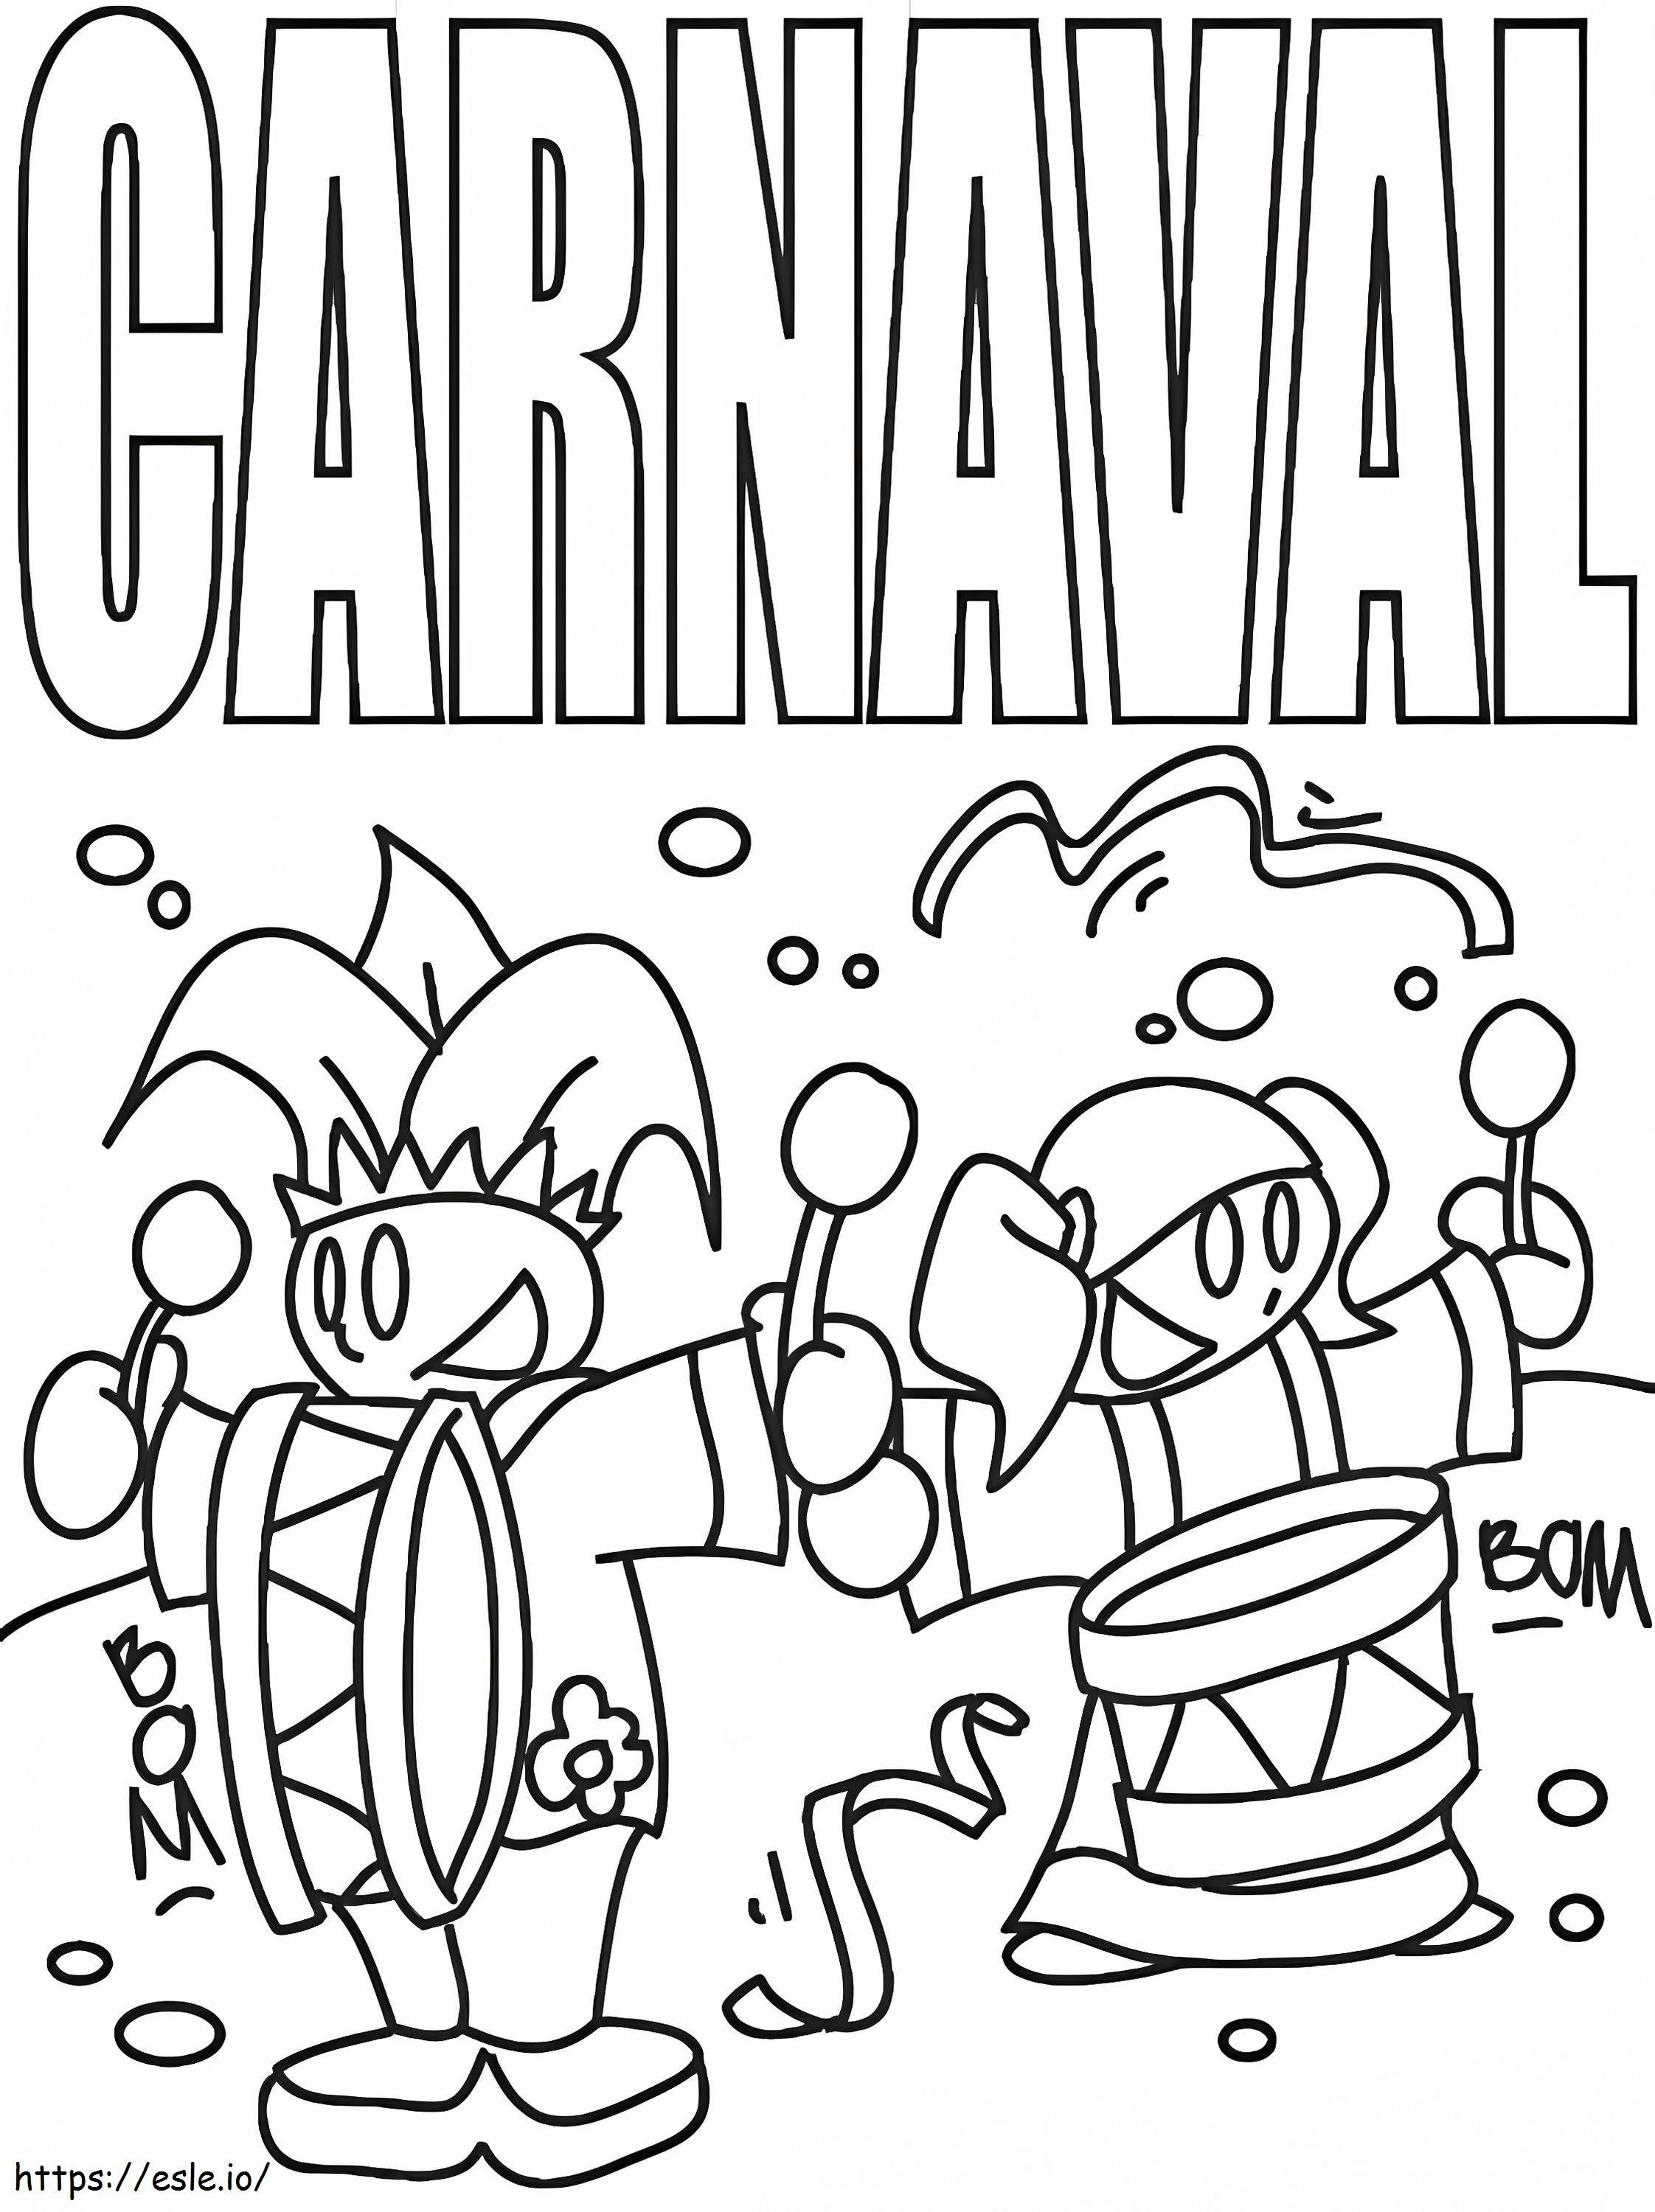 Carnival 22 coloring page